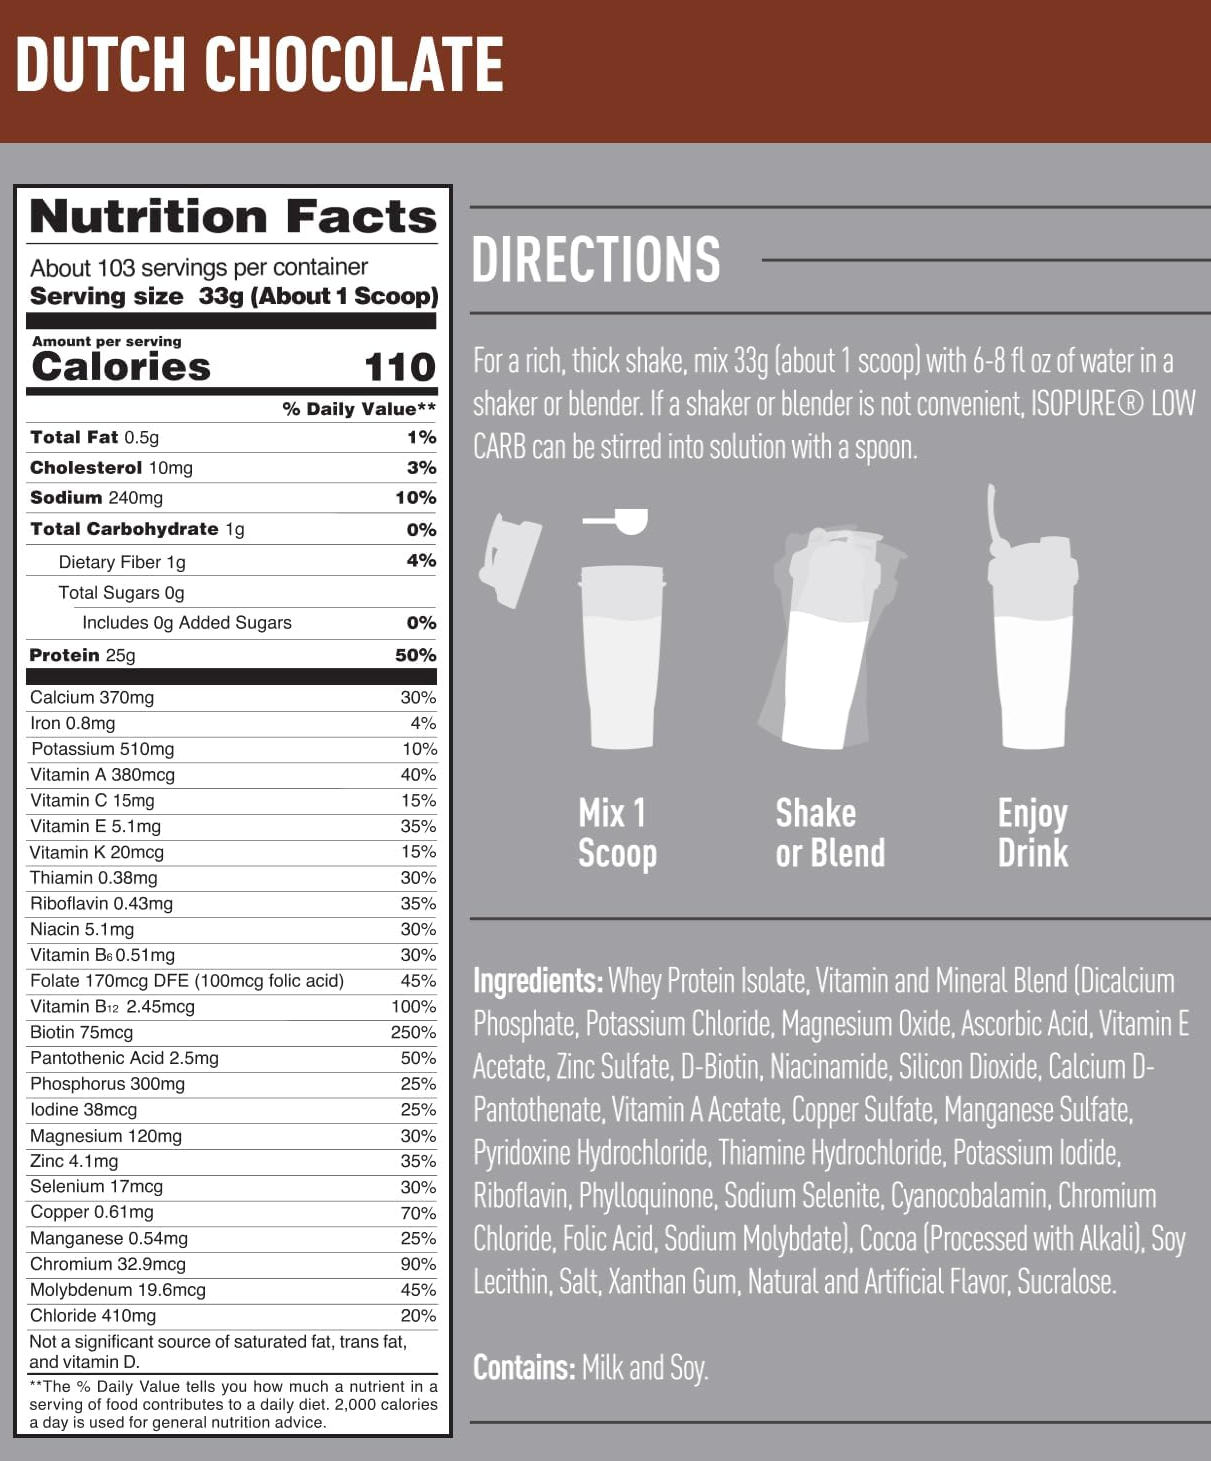 Dutch Chocolate nutrition facts. 103 servings per container. One serving: 33g, 110 calories, 0.5g fat, 10mg cholesterol, 240mg sodium, 1g carbs, 25g protein.